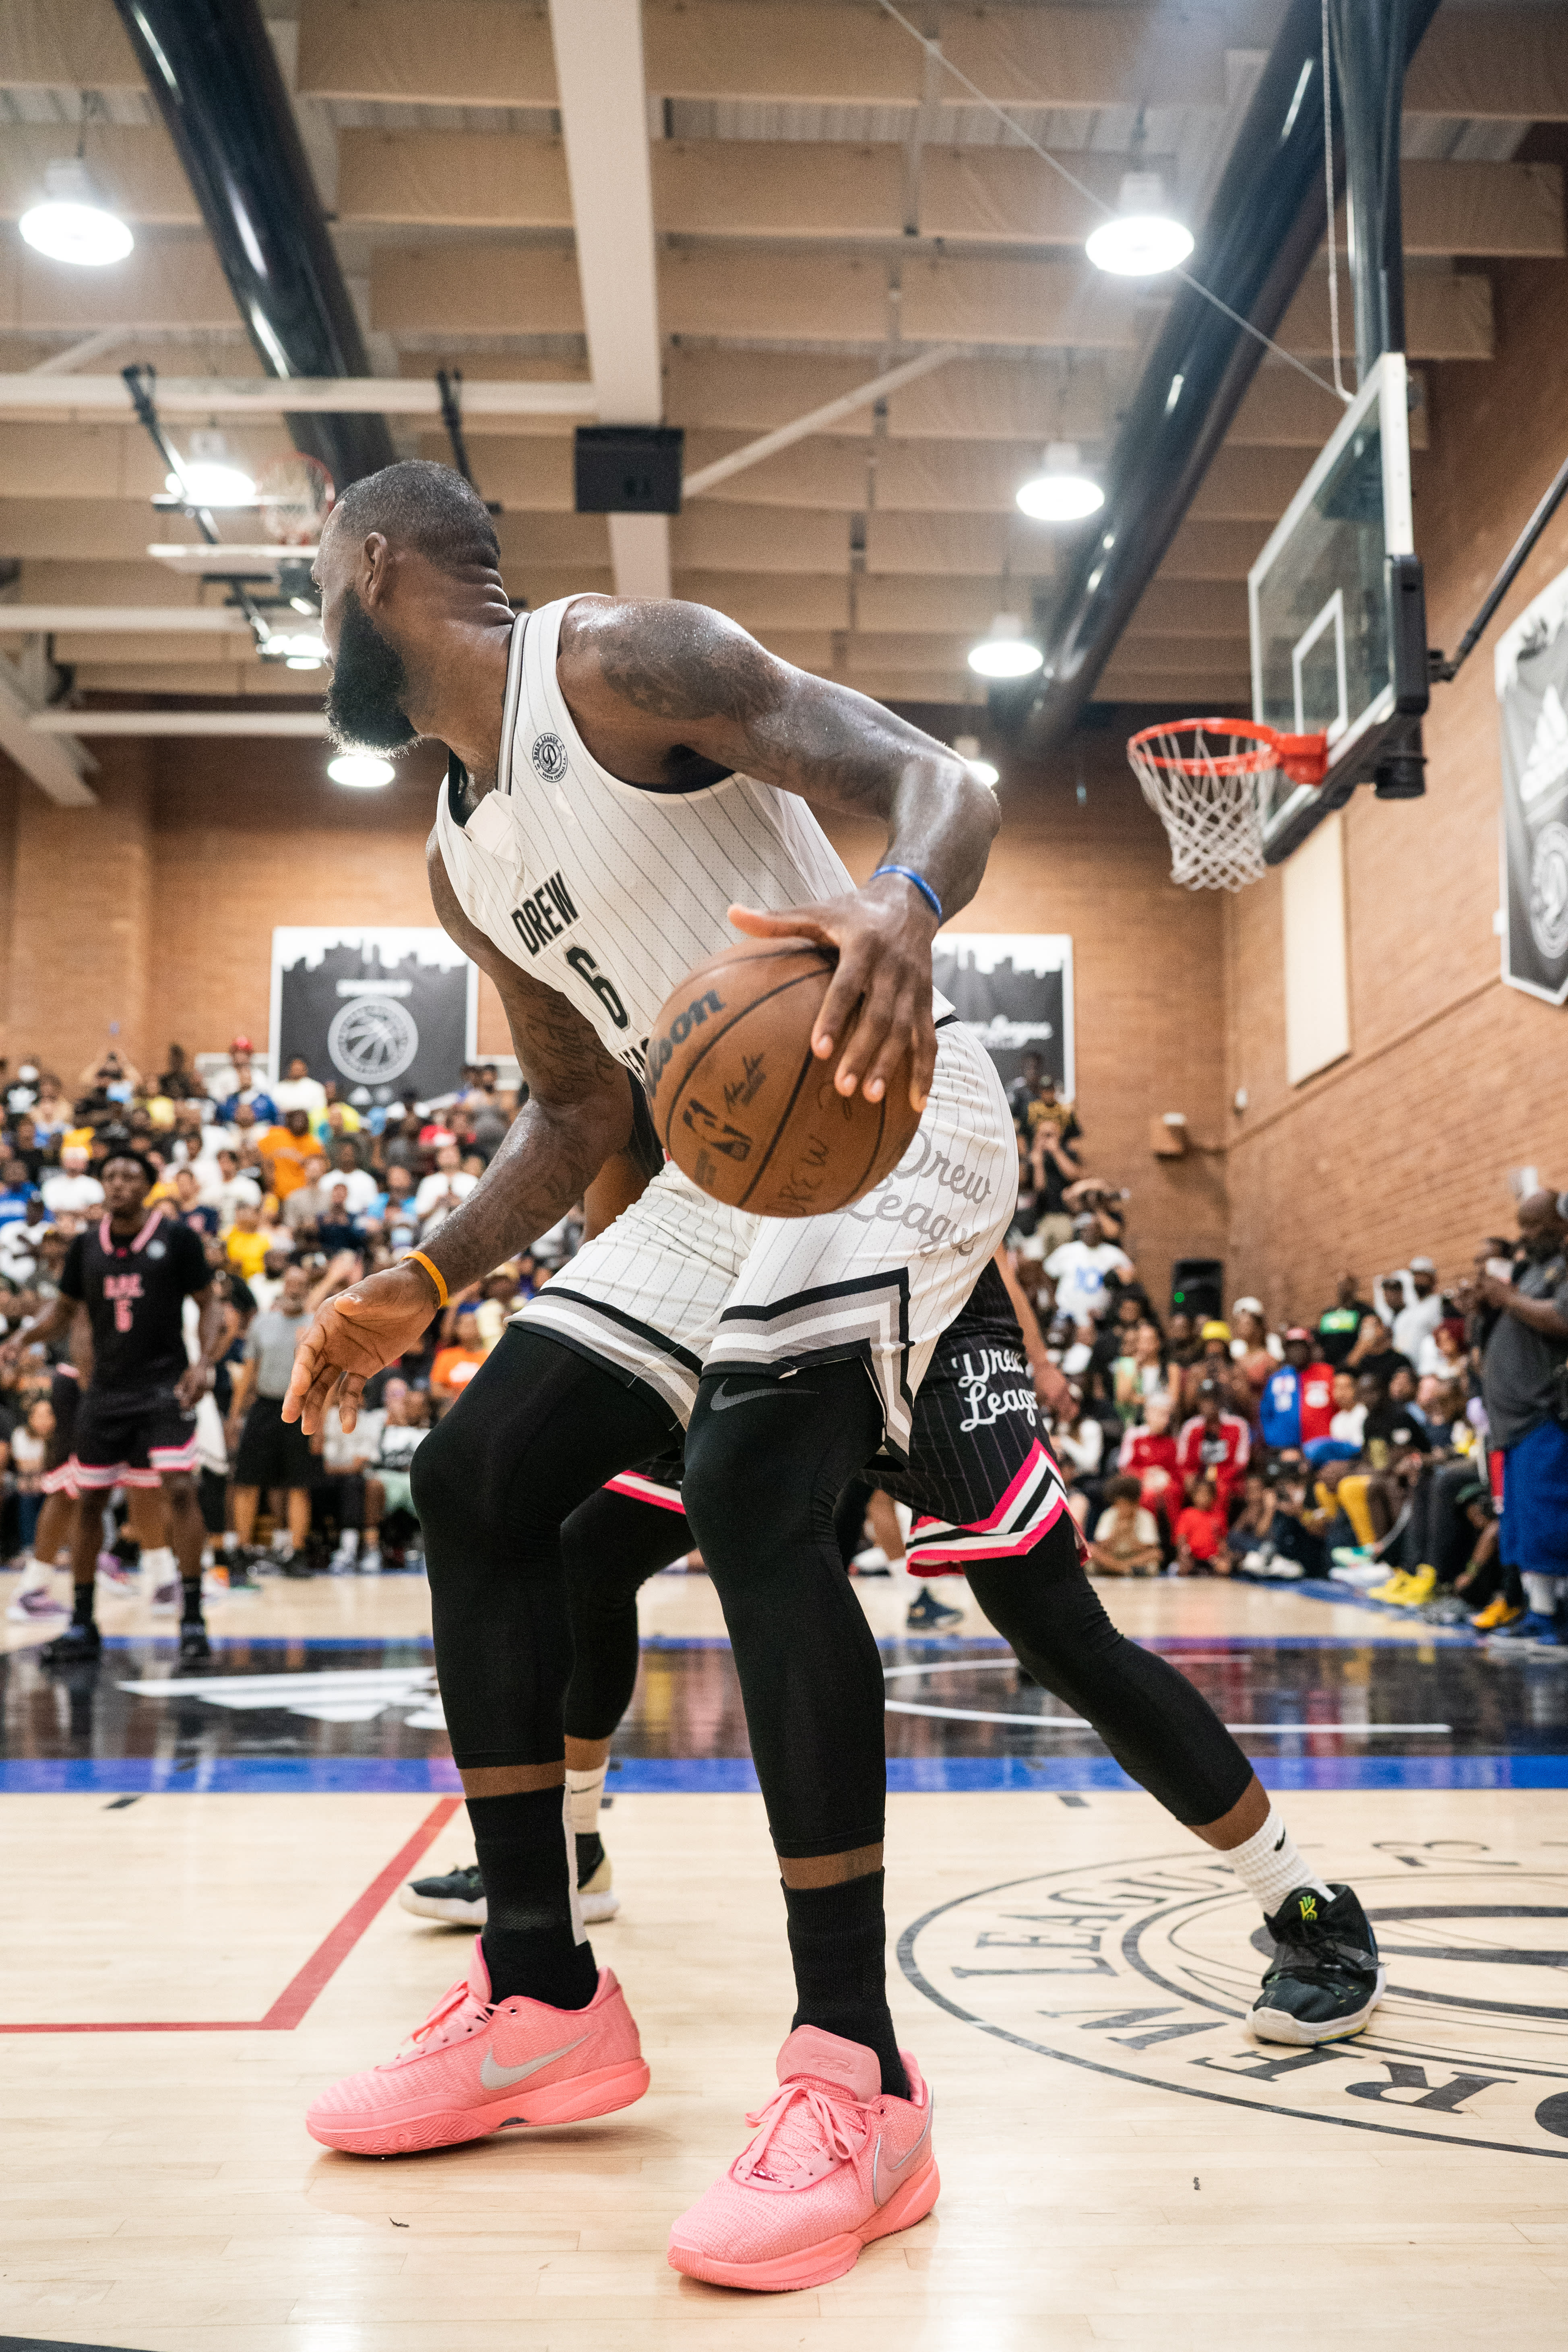 LeBron James appears in the Drew League on July 16, 2022